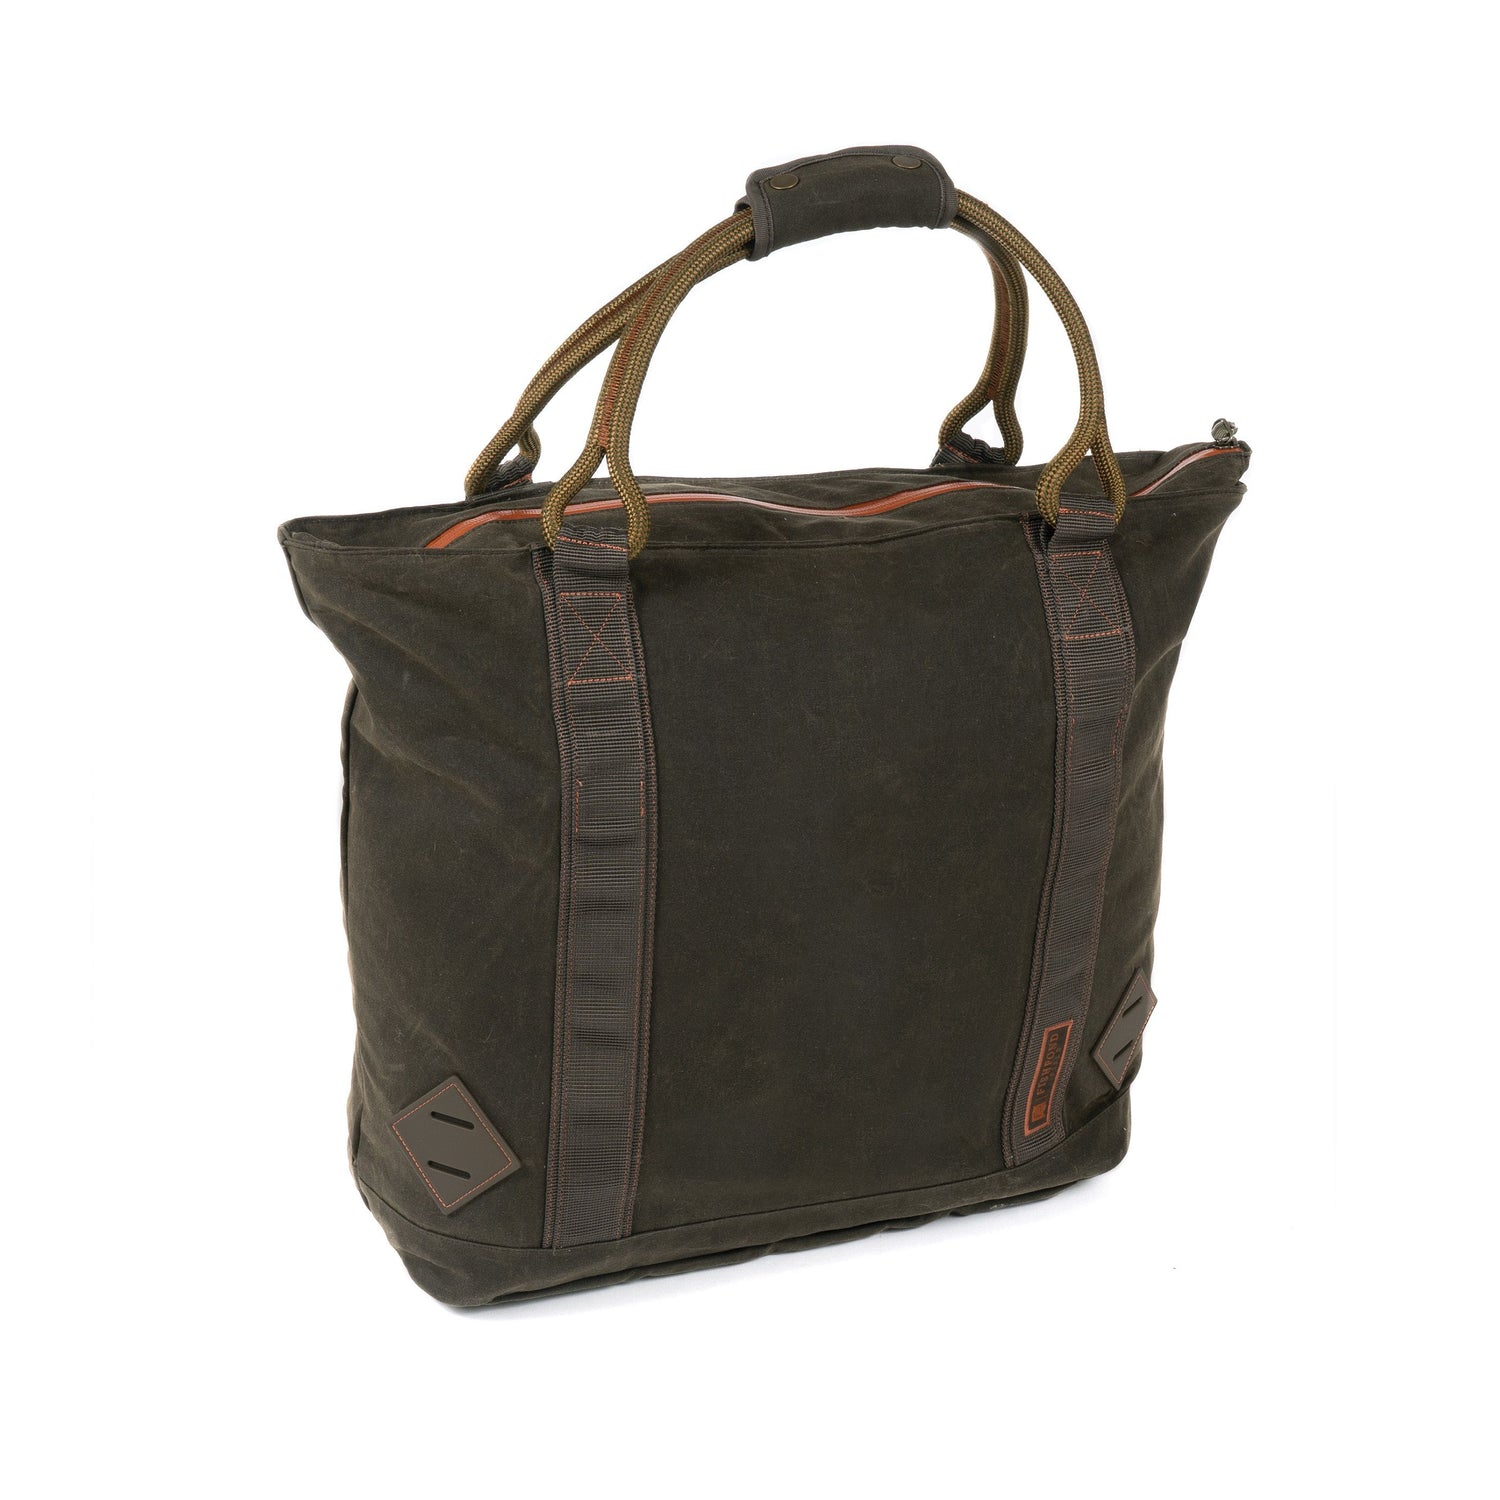 Backcountry 36L Gear Tote